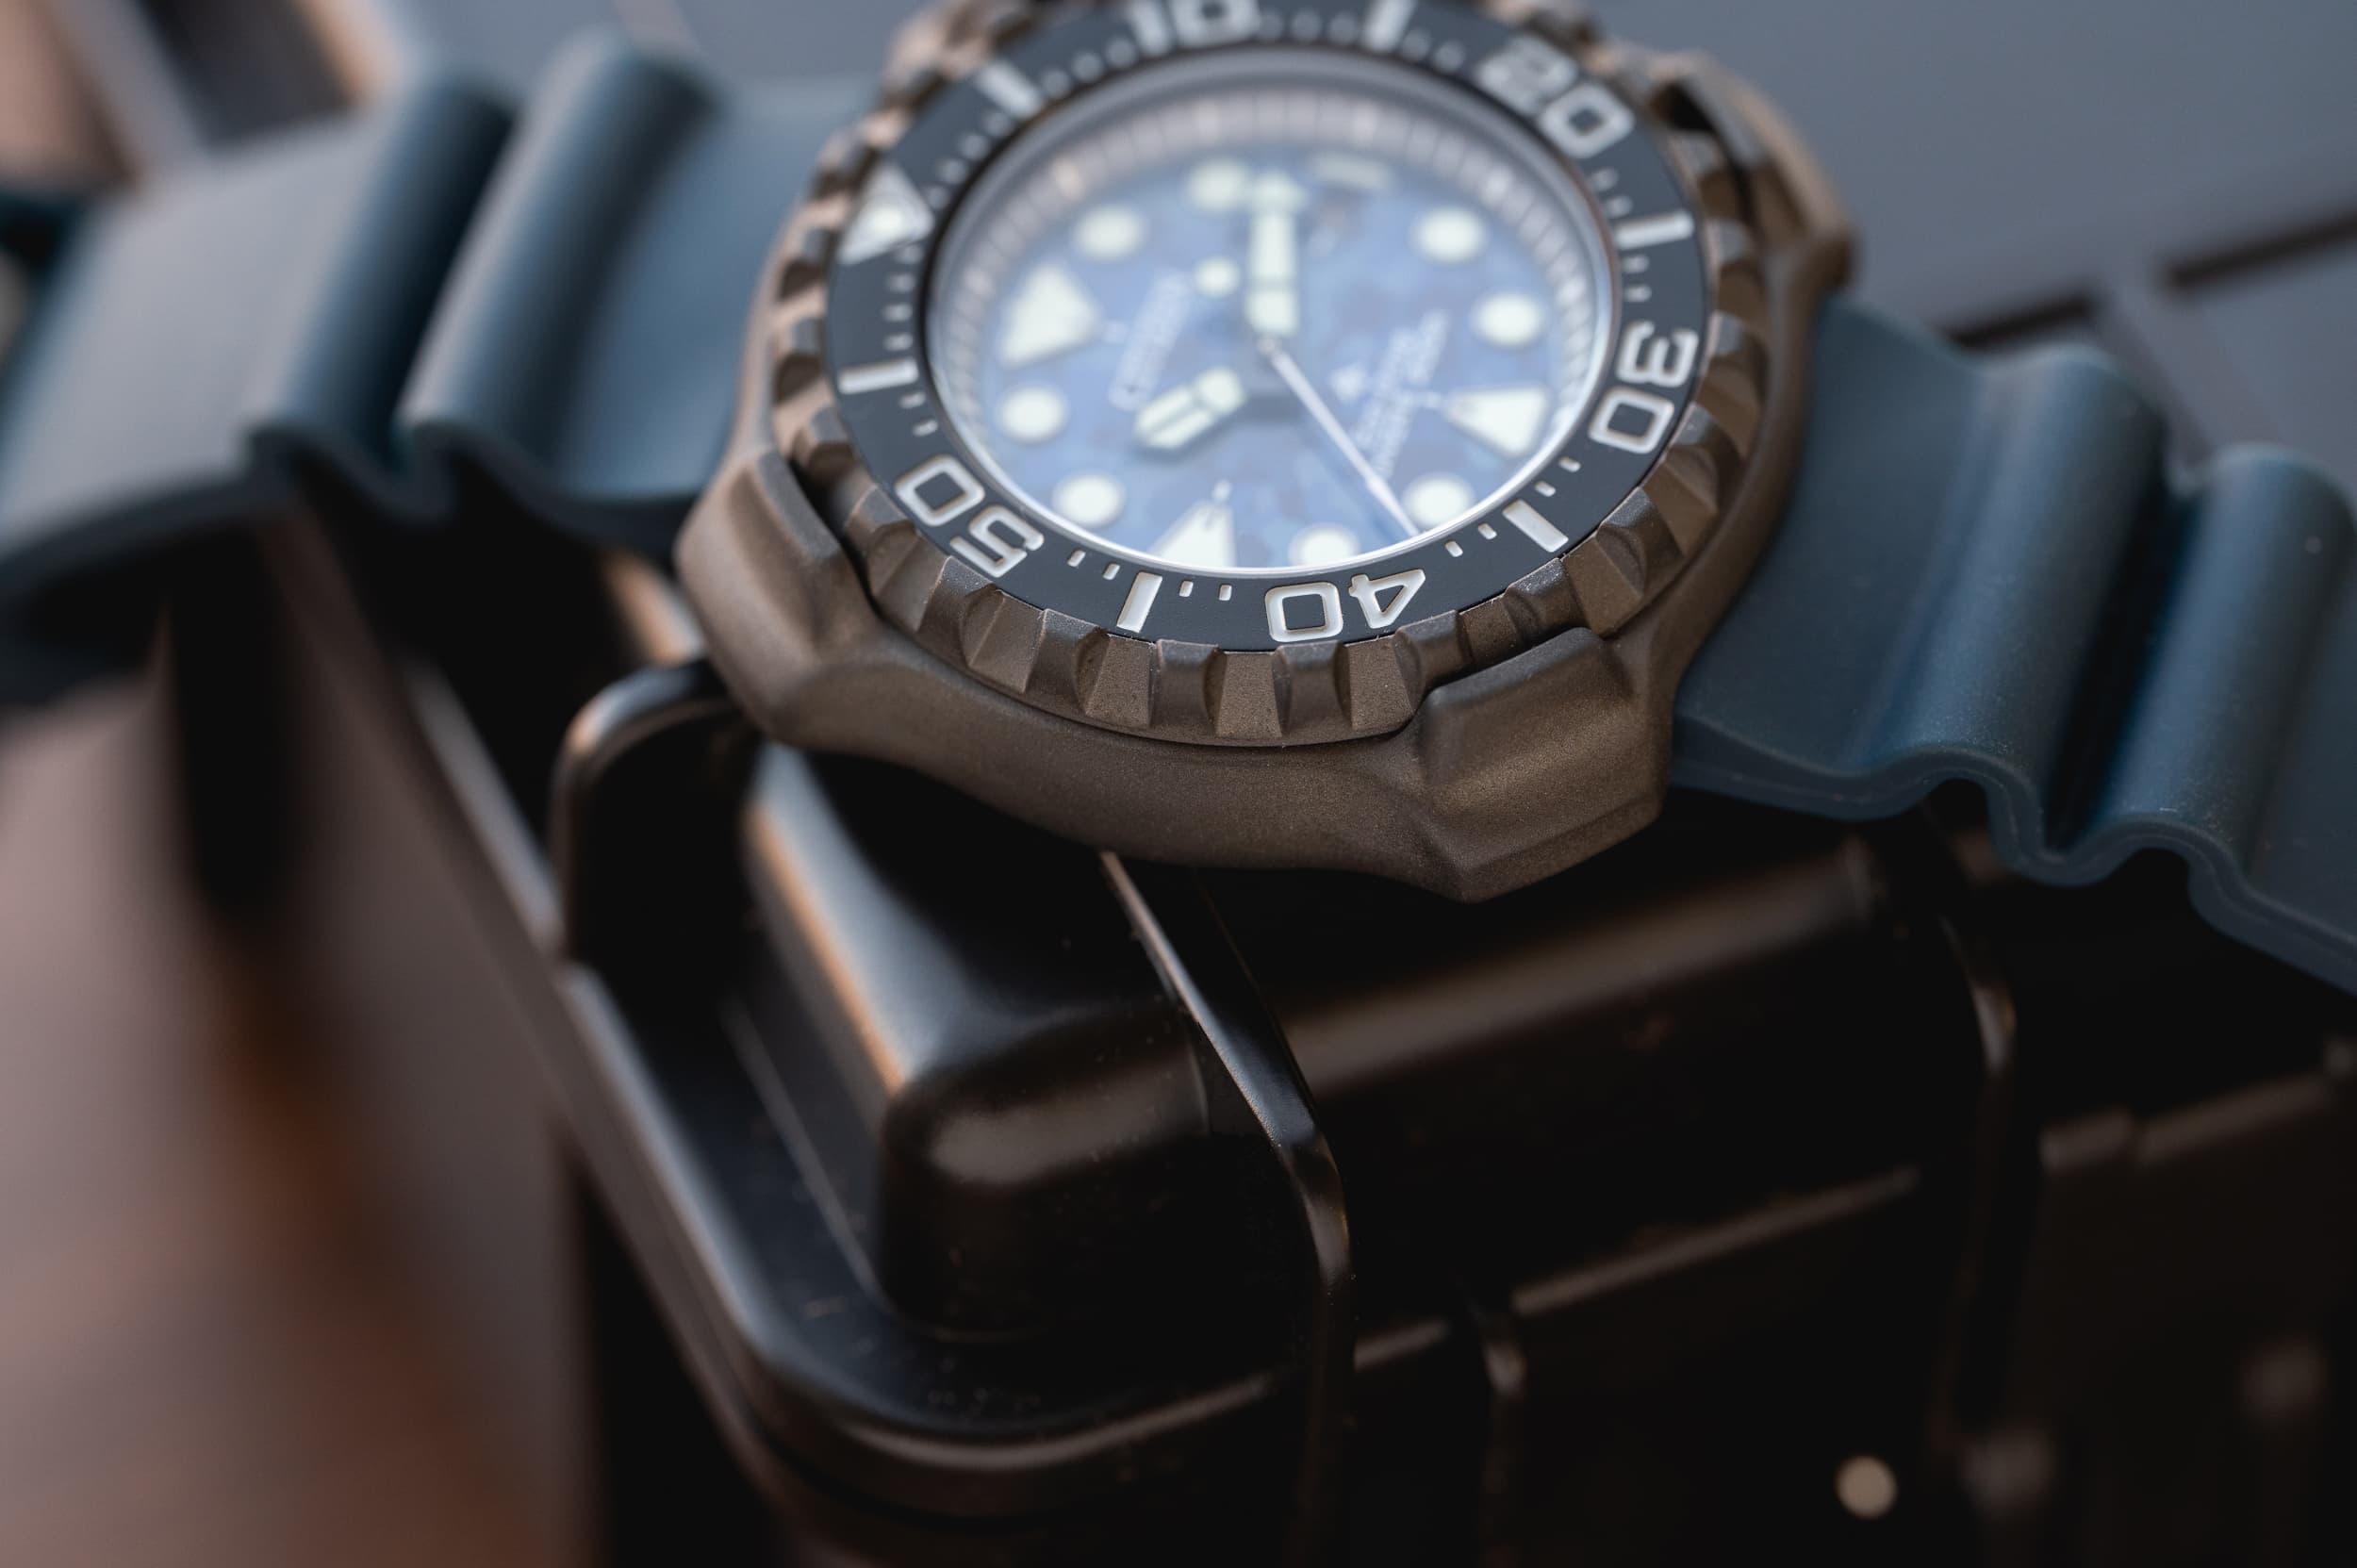 Review: The Assertive Promaster - Worn Yet Citizen & Approachable Wound Diver BN0227-09L